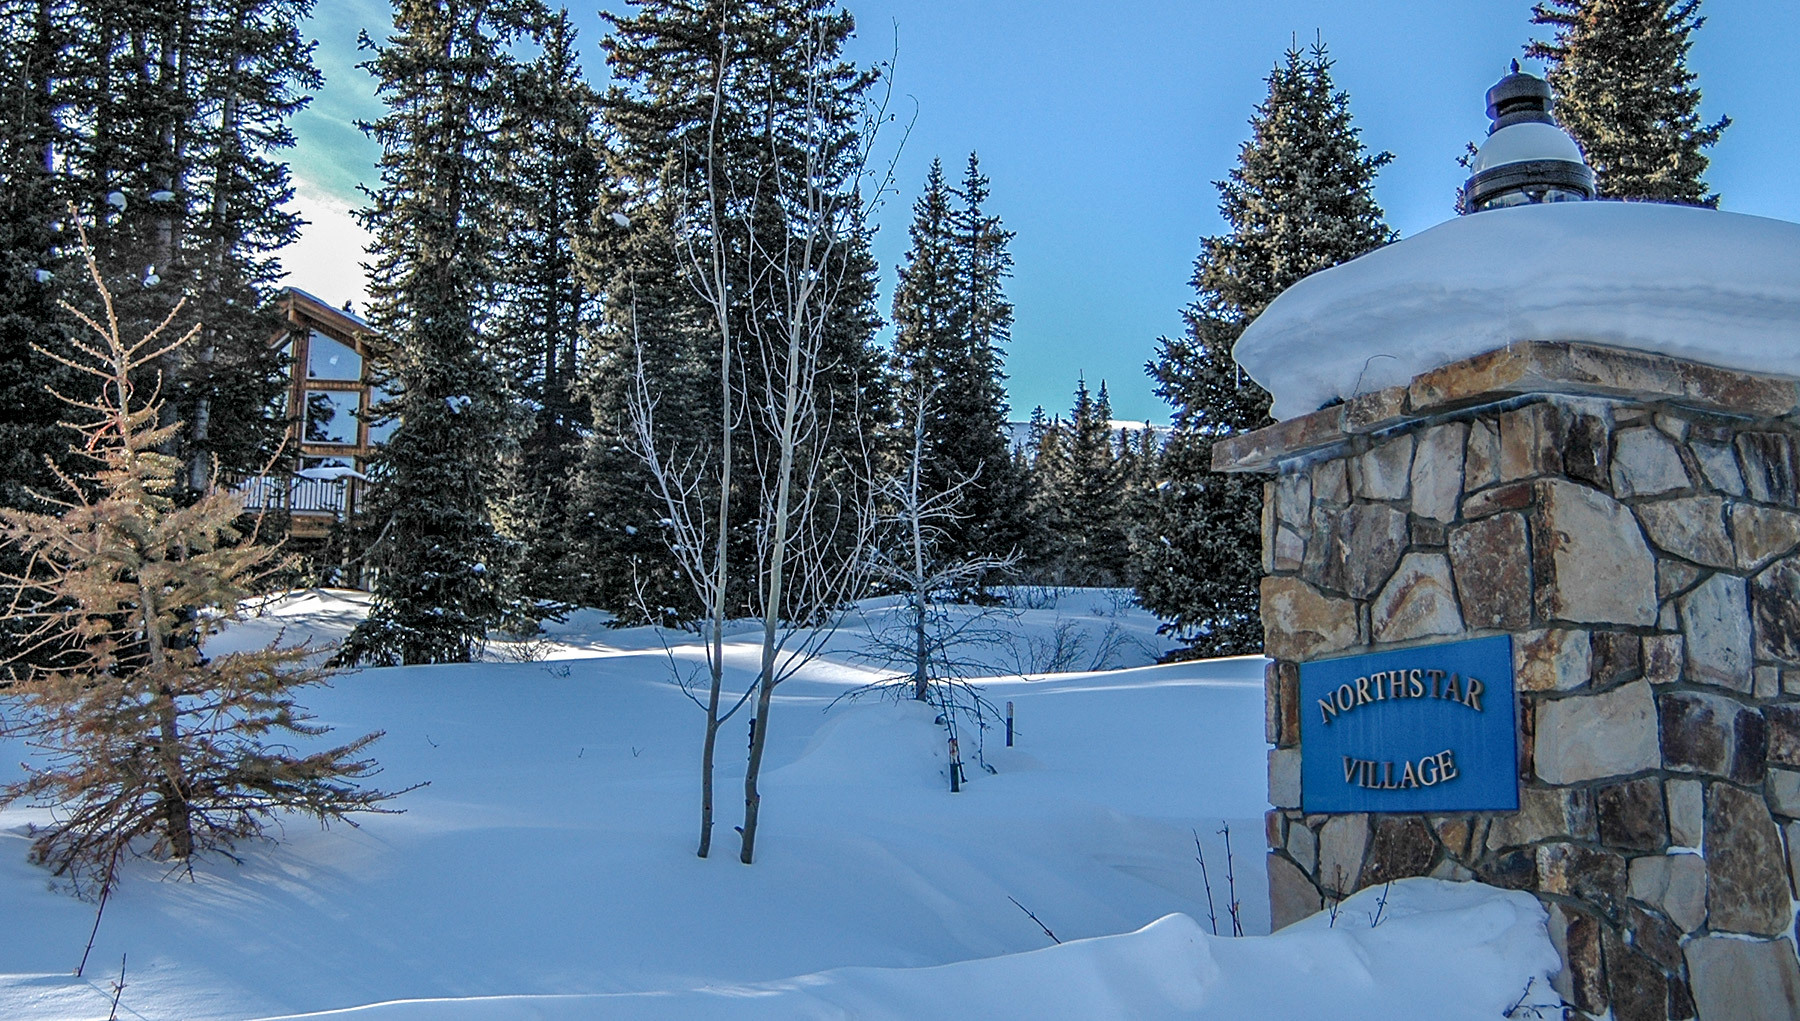 Quandary Mountain Estates or Northstar Village south of downtown Breckenridge